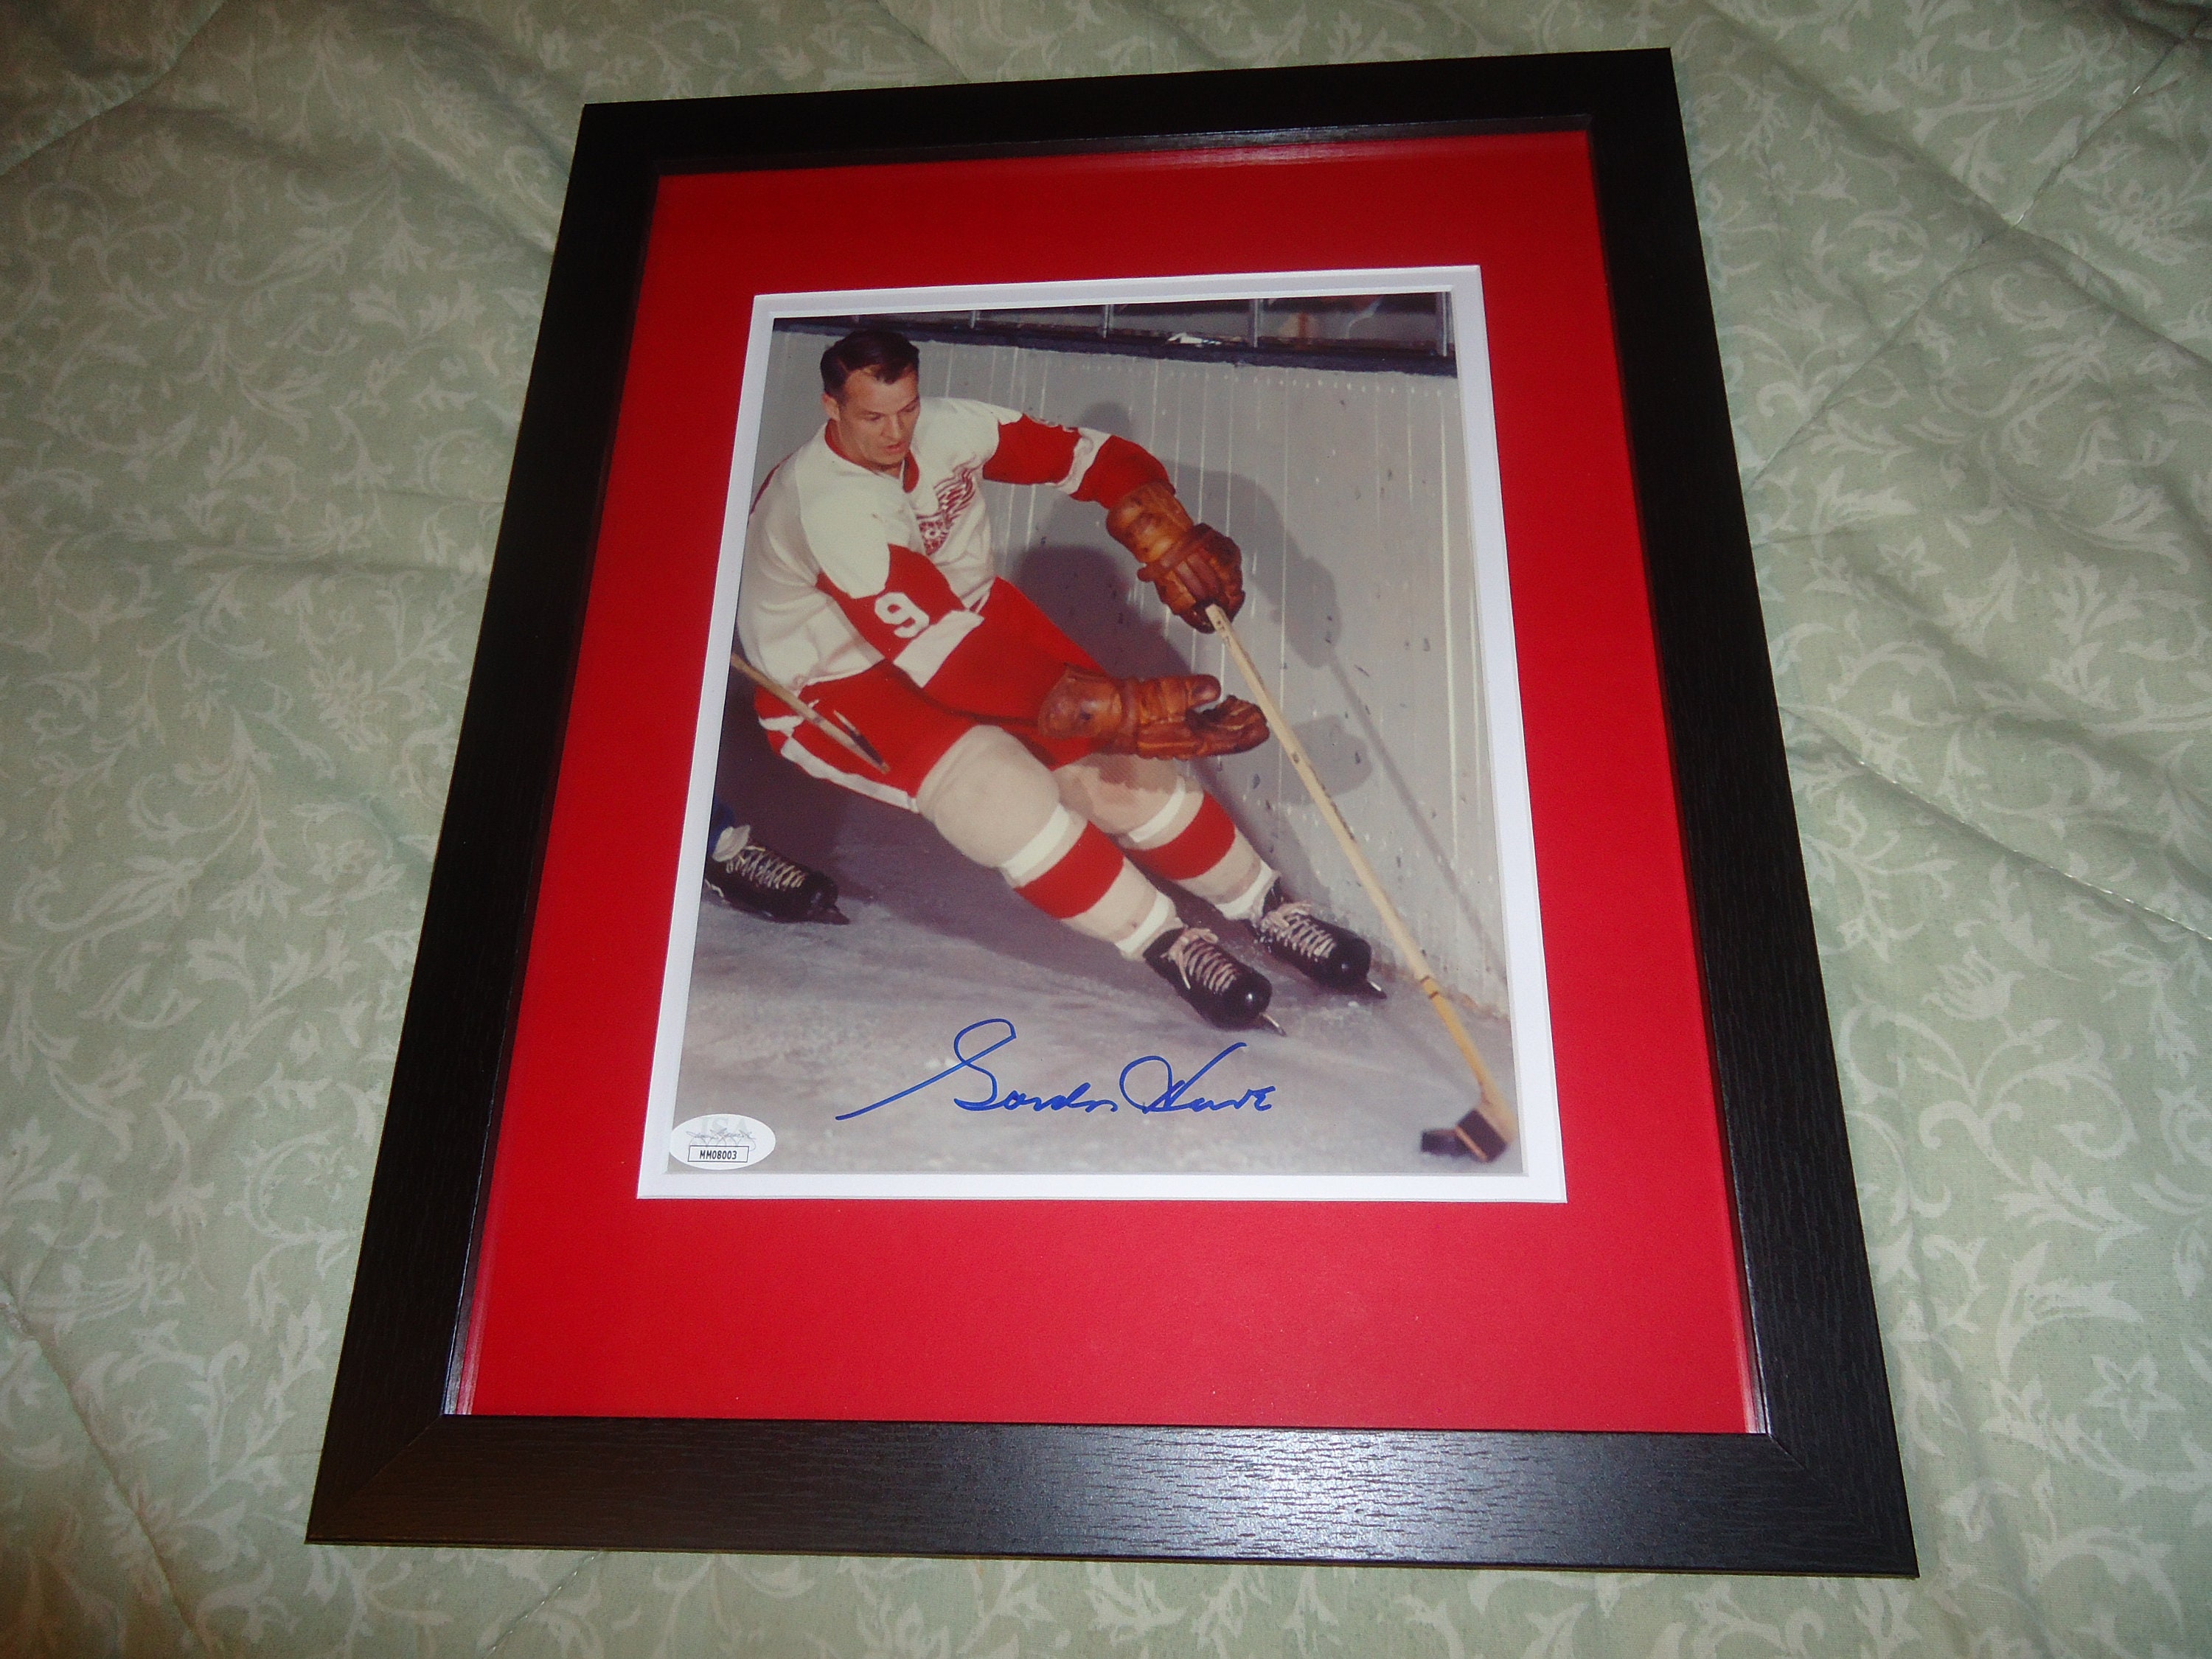 Autographed Gordie Howe Photo - 8X10.5 New England Whalers)